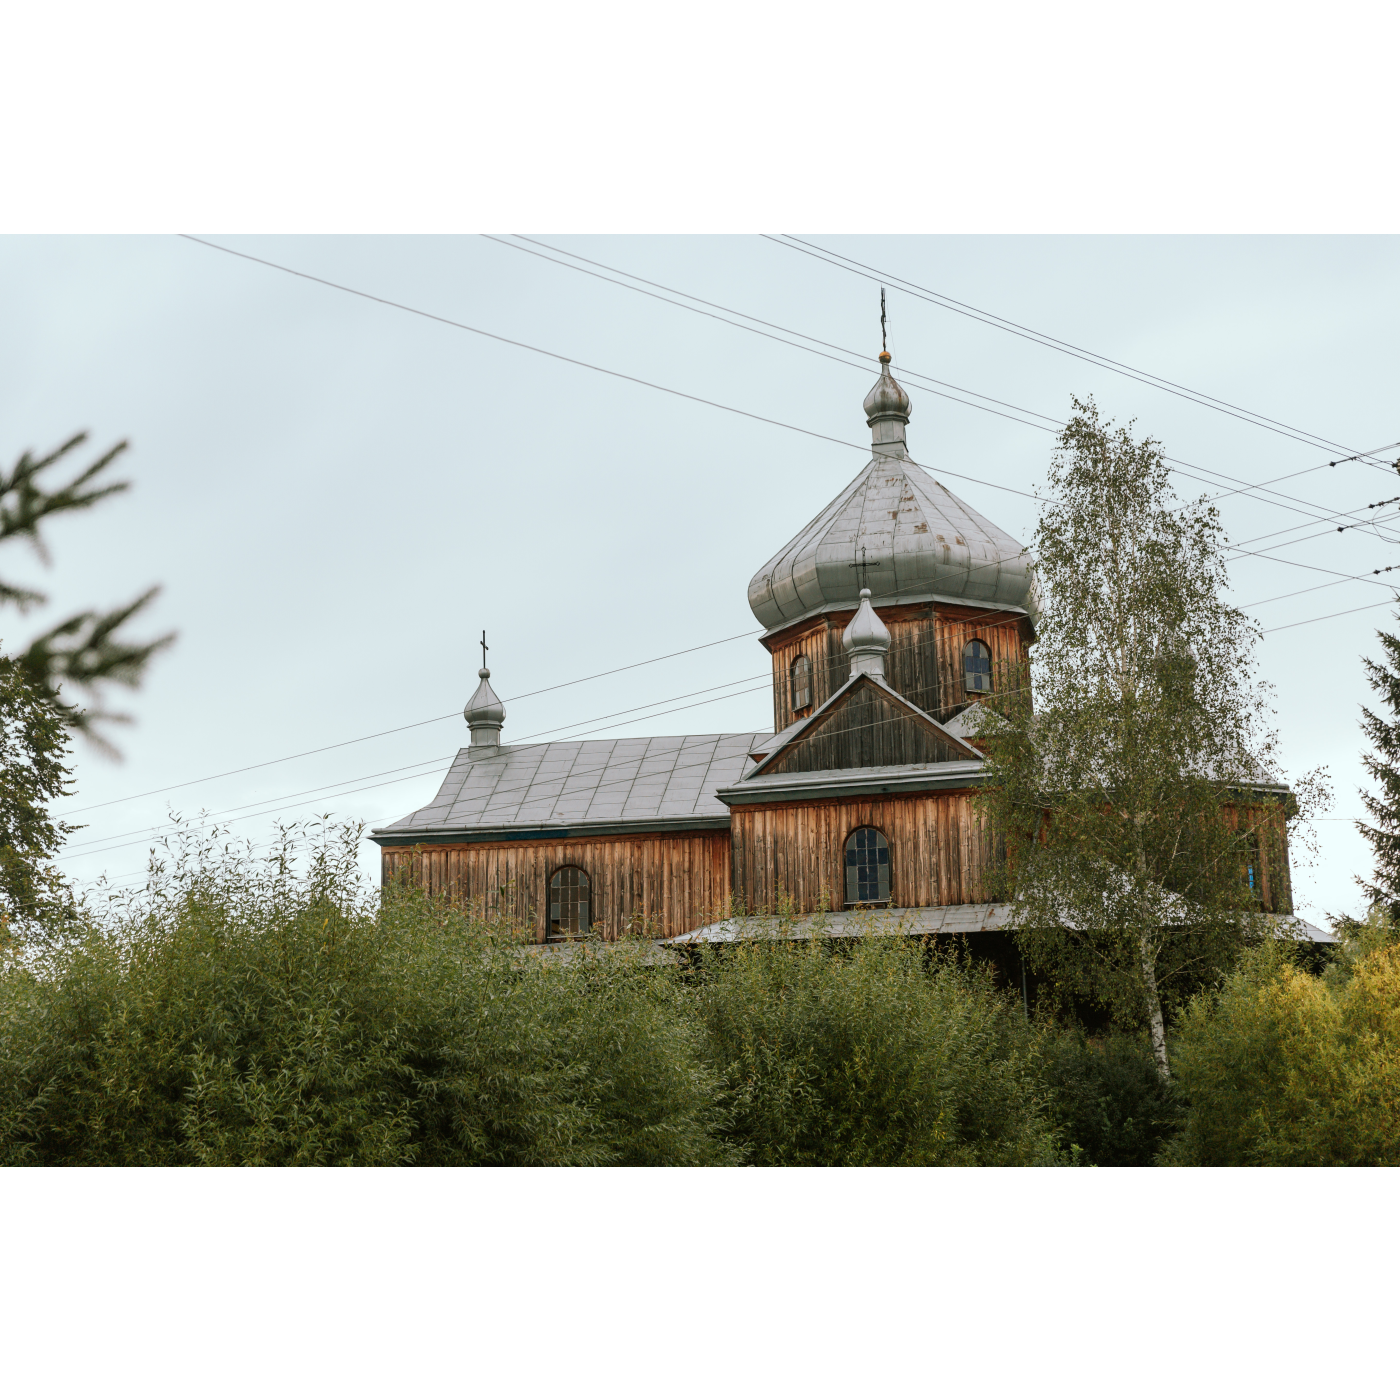 A wooden church with one main dome and a gray roof, green trees around